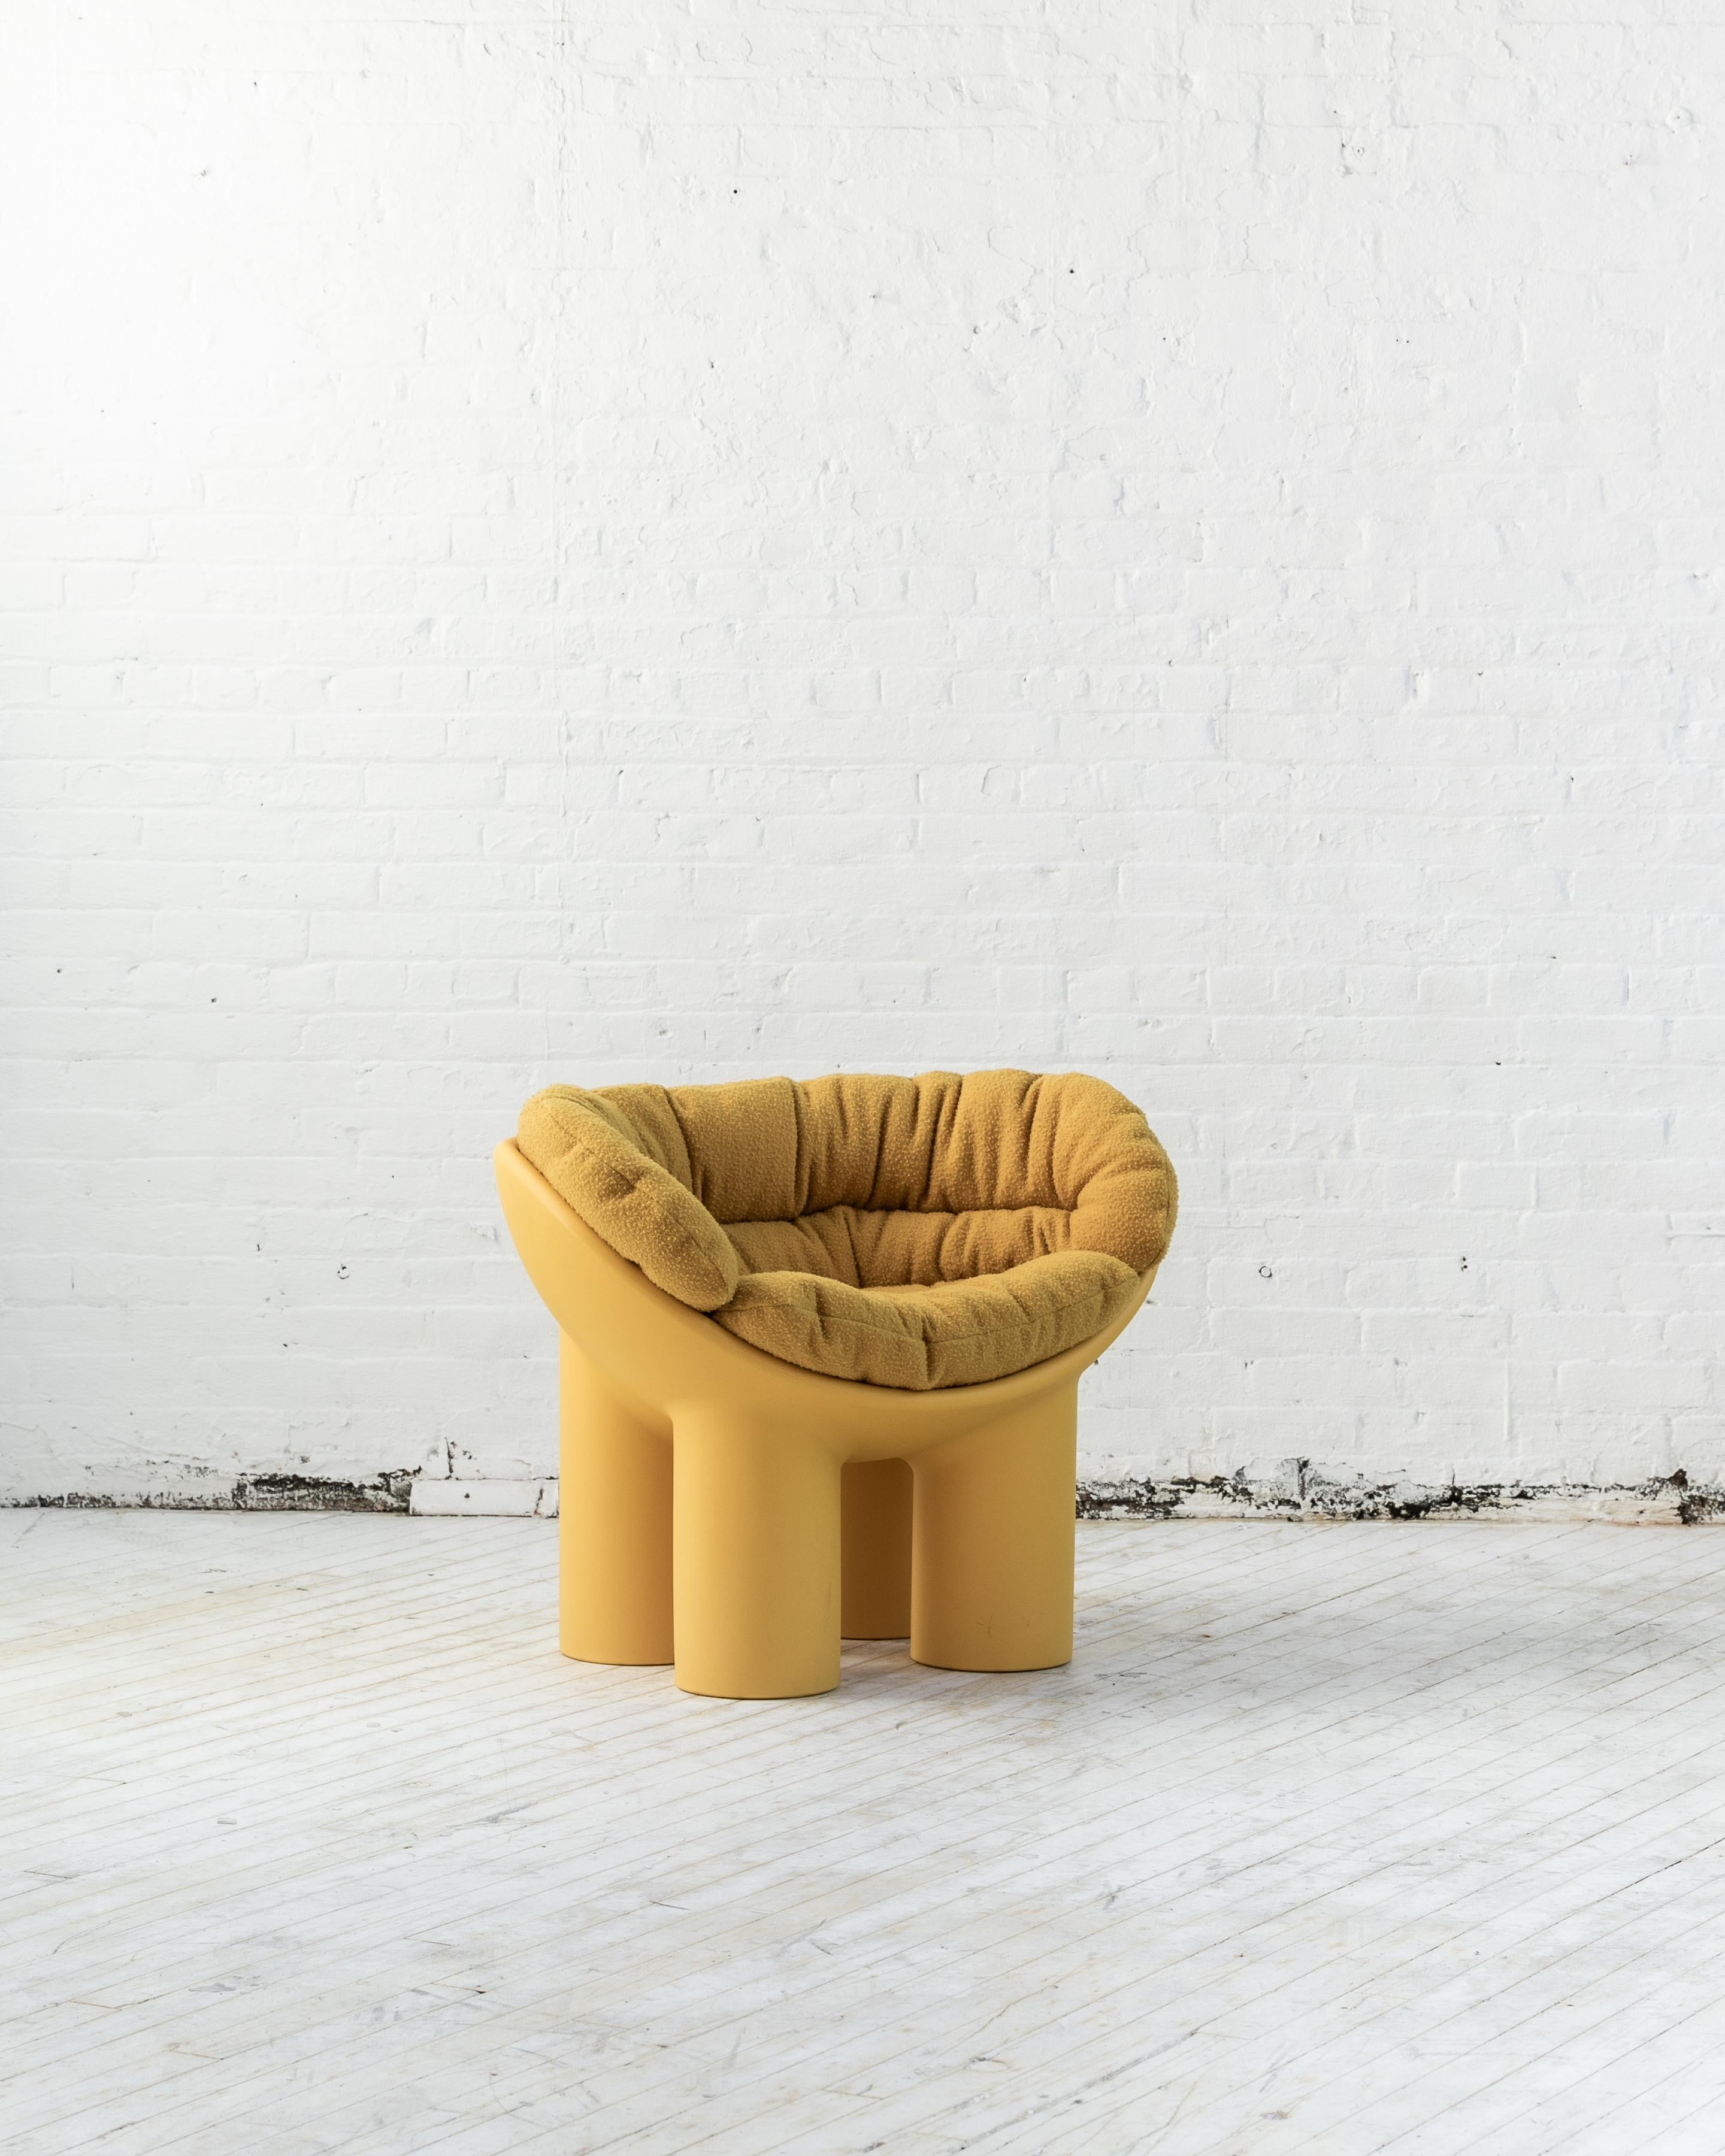 Duplex launches DUPLEX X CASENTINO. The iconic Roly Poly armchair designed by Faye Toogood and manufactured by Driade, with the exclusive cushions in the ancient Casentino cloth from Tuscany, Italy.

Casentino is a rugged and compact wool fabric